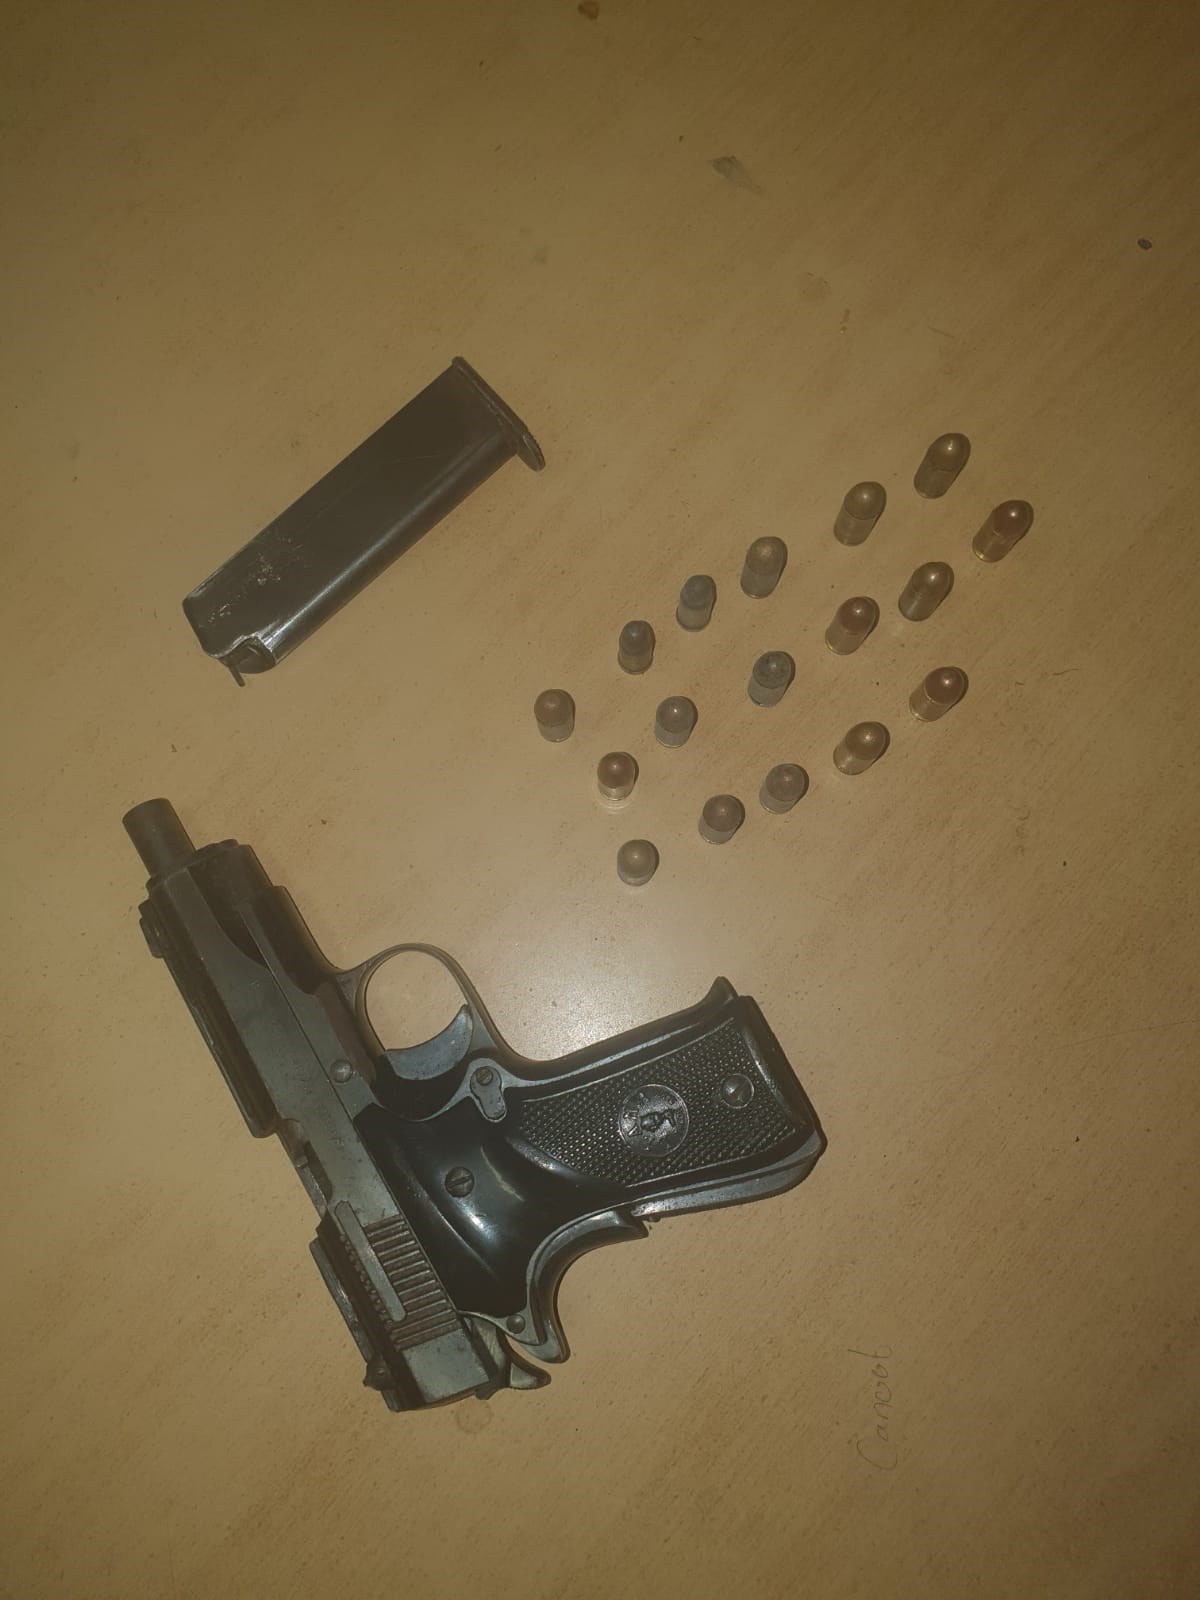 Suspect arrested with unlicensed firearm in Lavender Hill